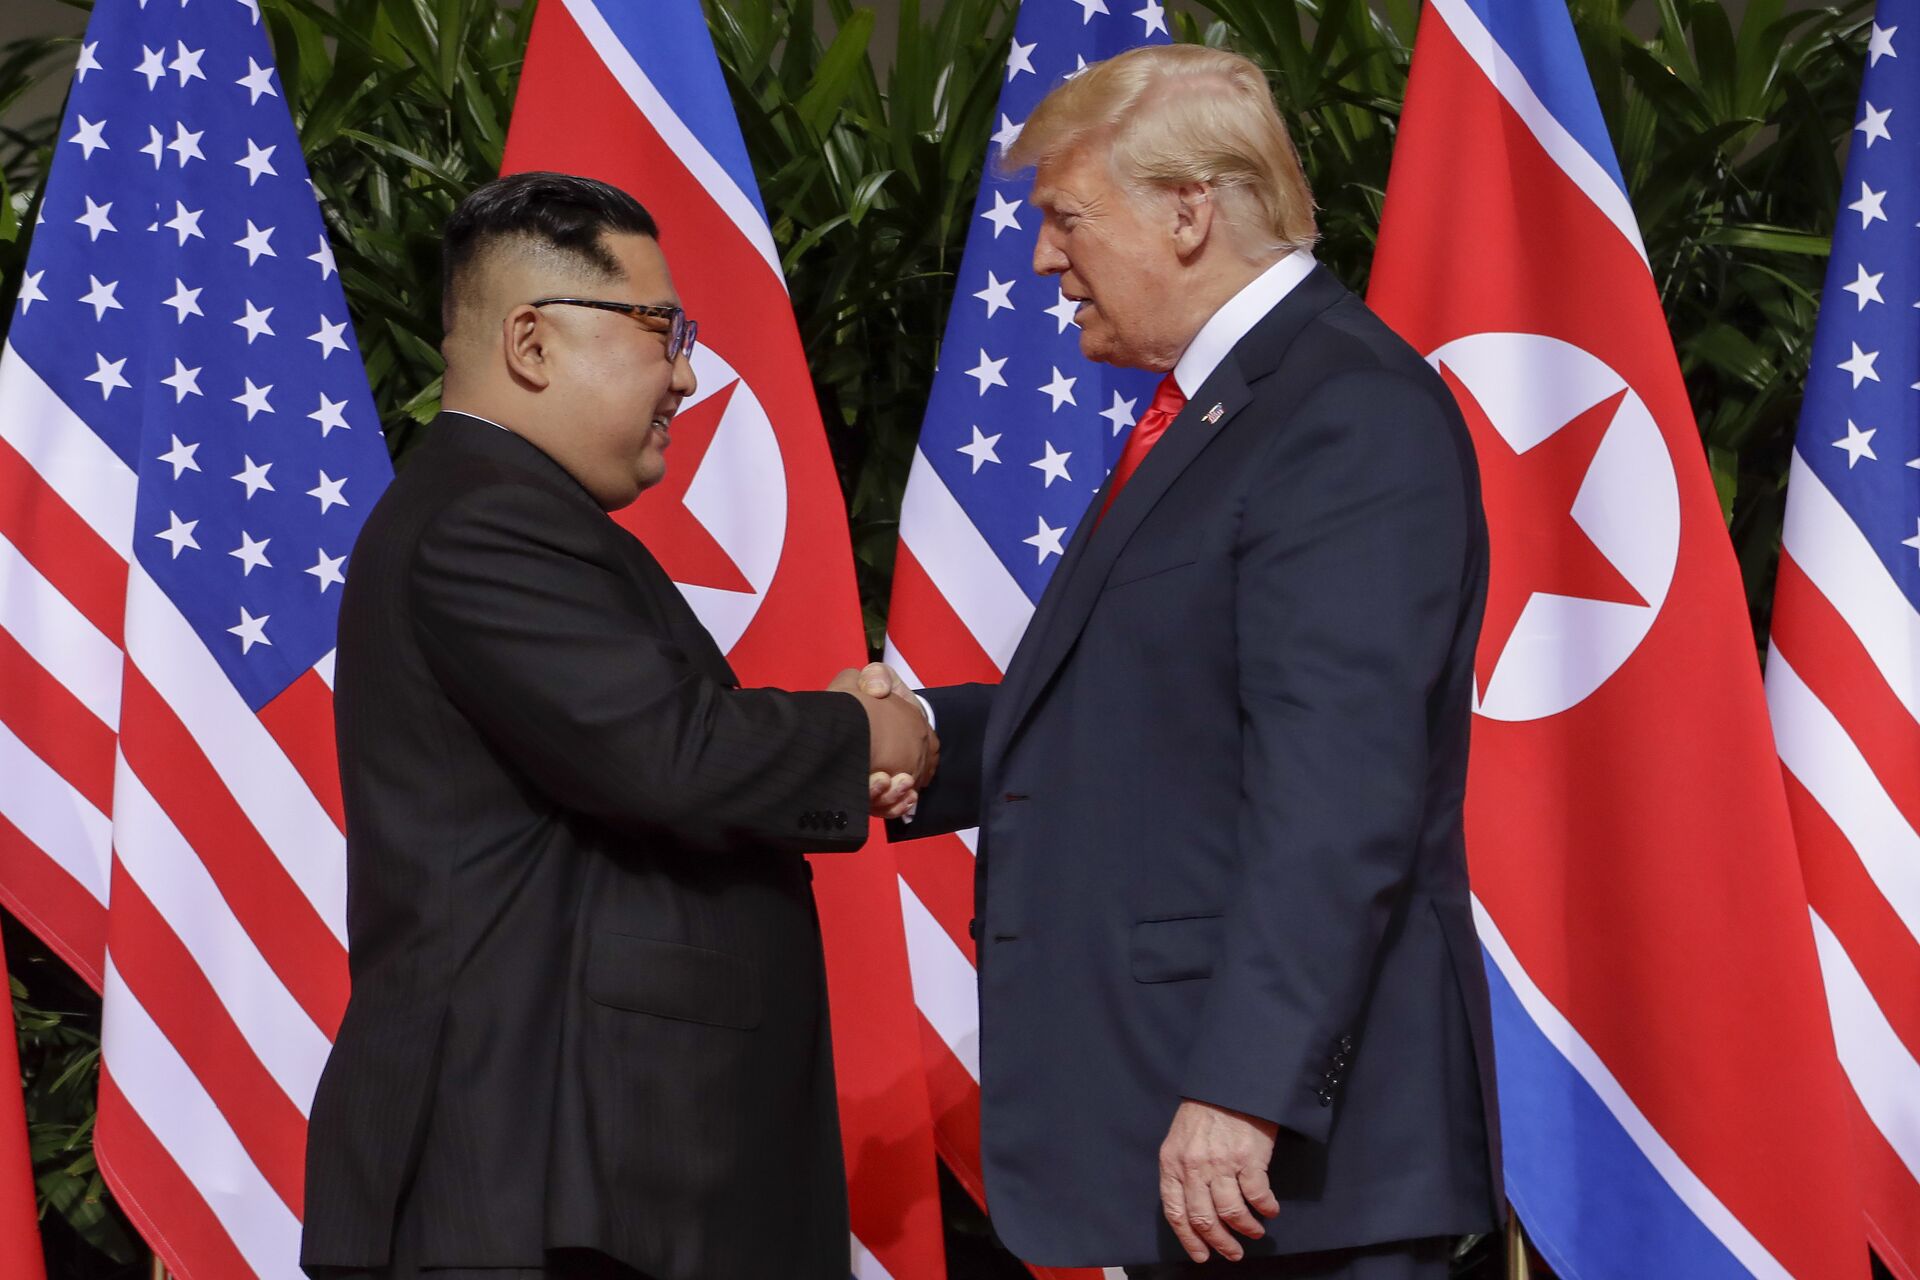 Trump Offered Kim a Ride Home on Air Force One During Hanoi Summit - Report - Sputnik International, 1920, 22.02.2021